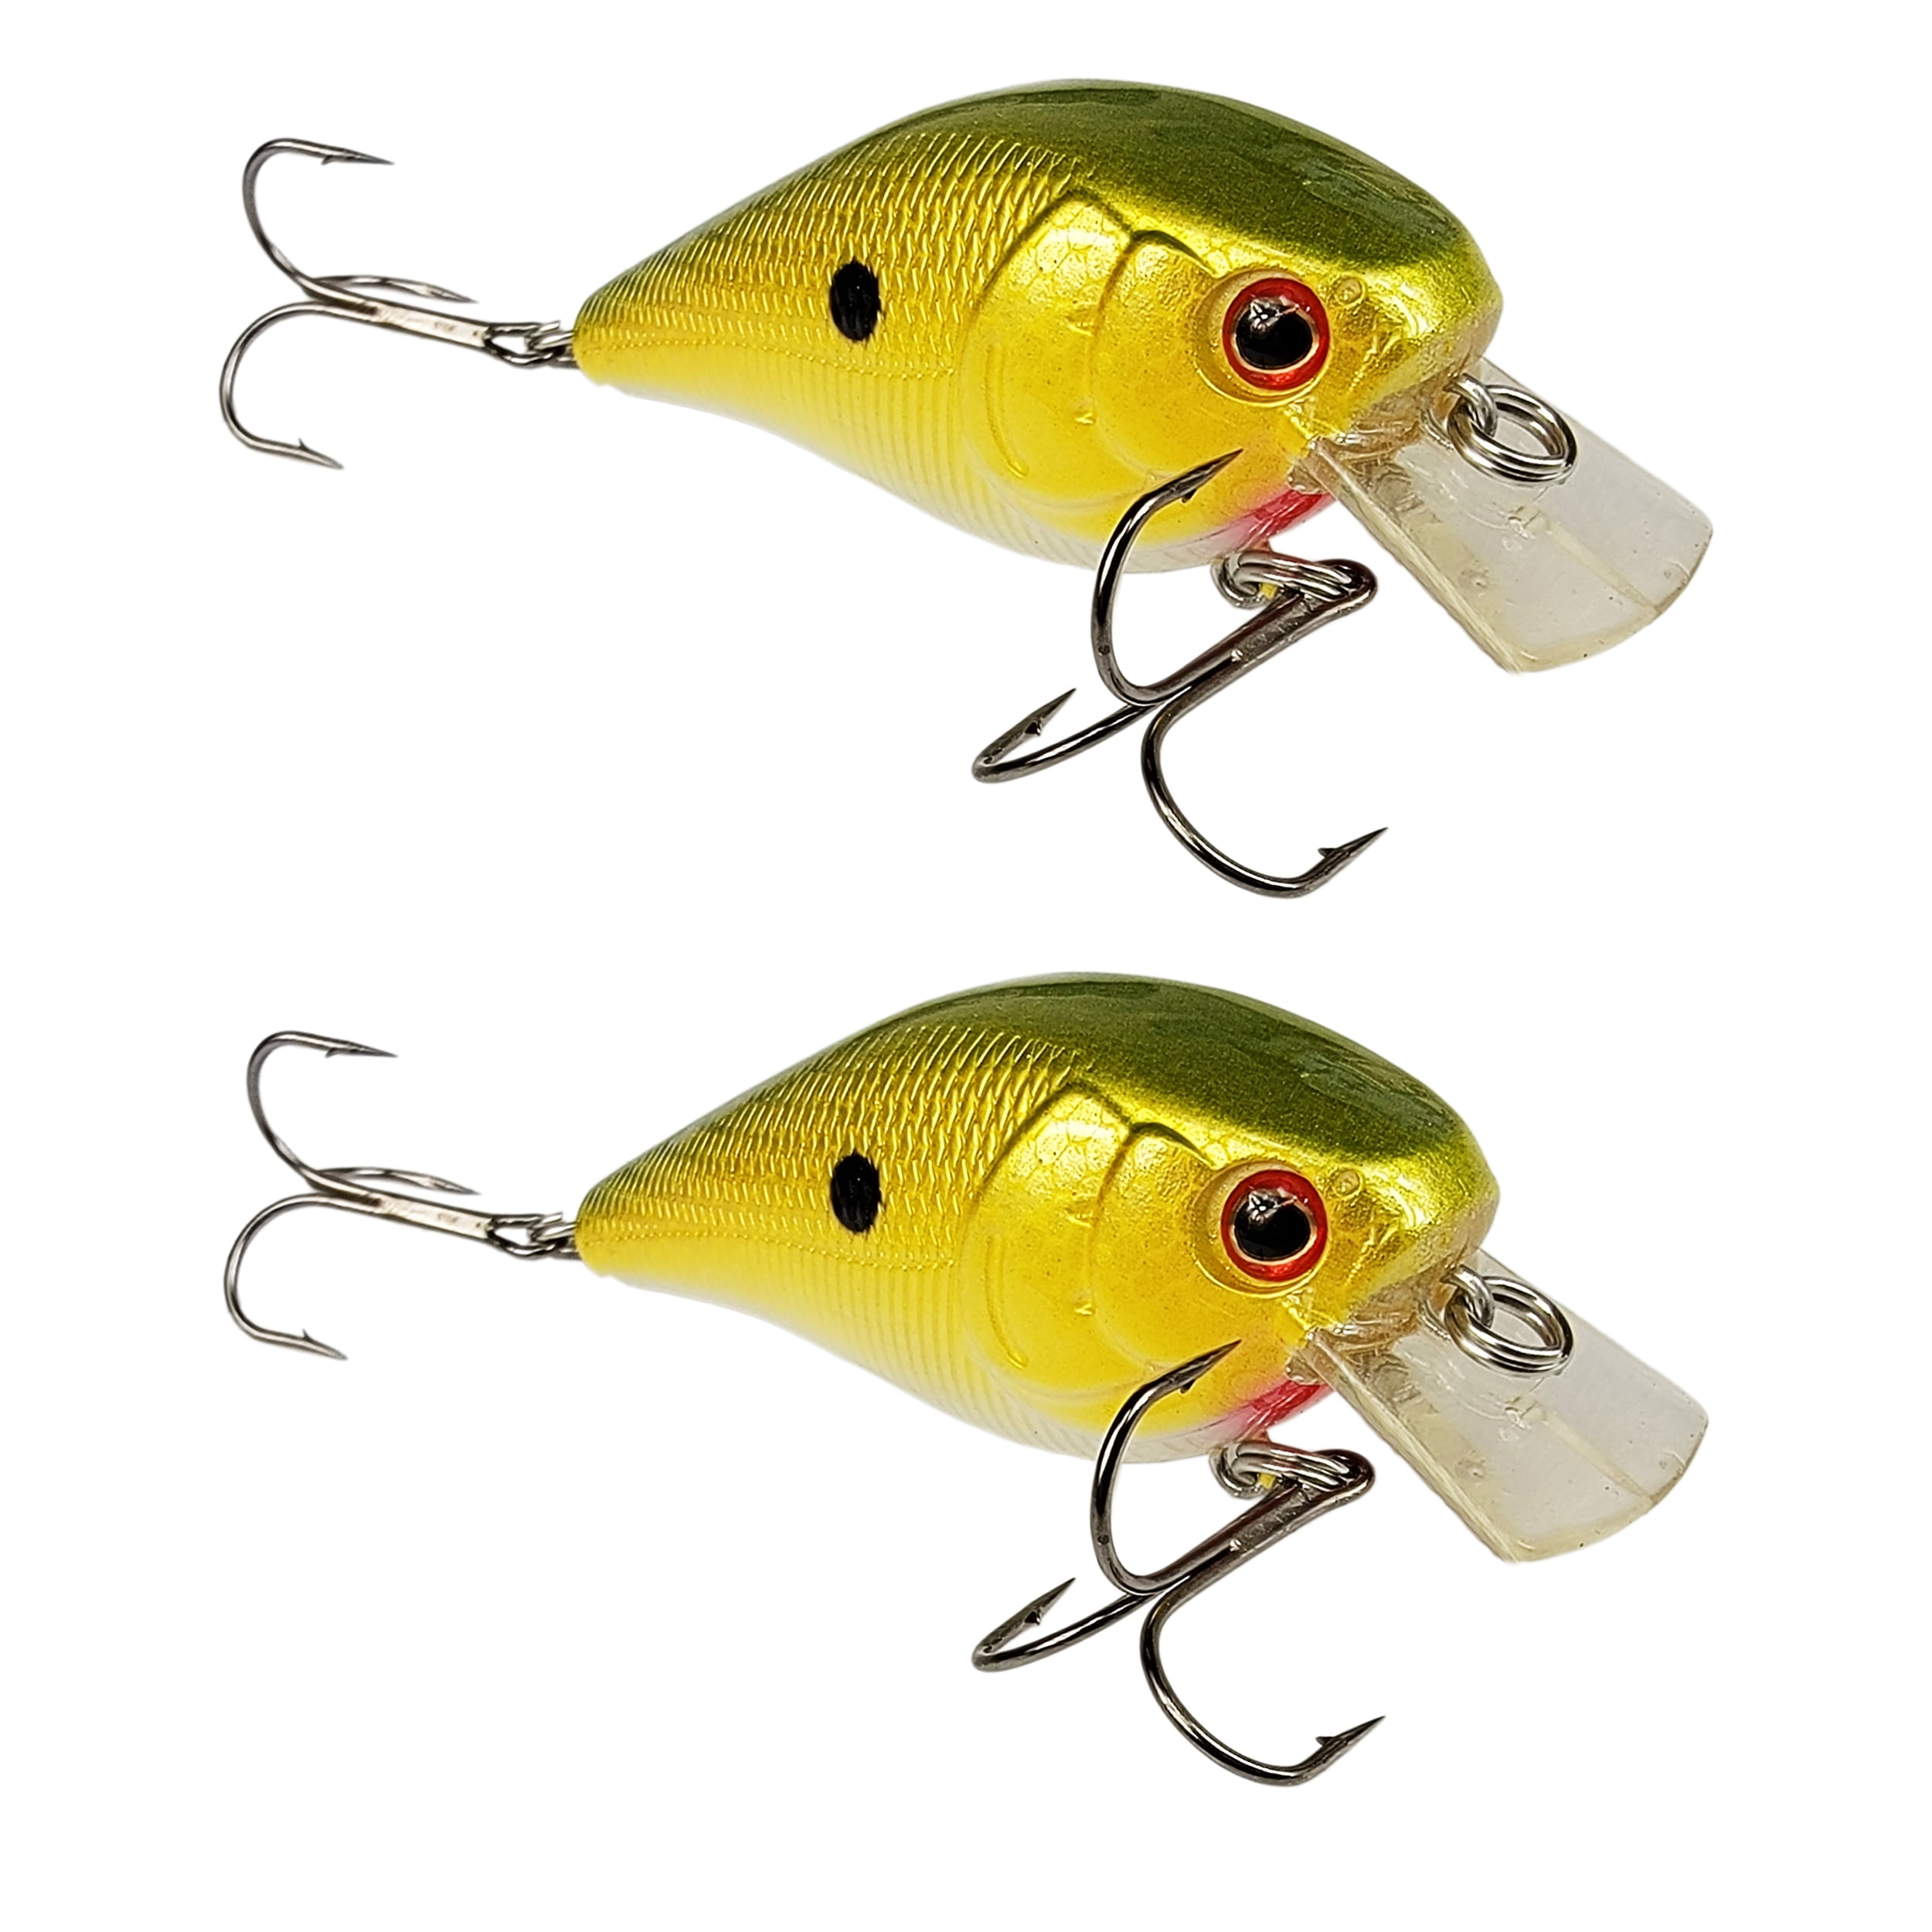 Tackle HD 2-Pack Crankhead Crankbait, Fishing Bait with 9 to 14 Feet Depth, Fishing  Lures for Freshwater or Saltwater, Hard Swimbaits for Bass, Crappie, or  Walleye, Firetiger 